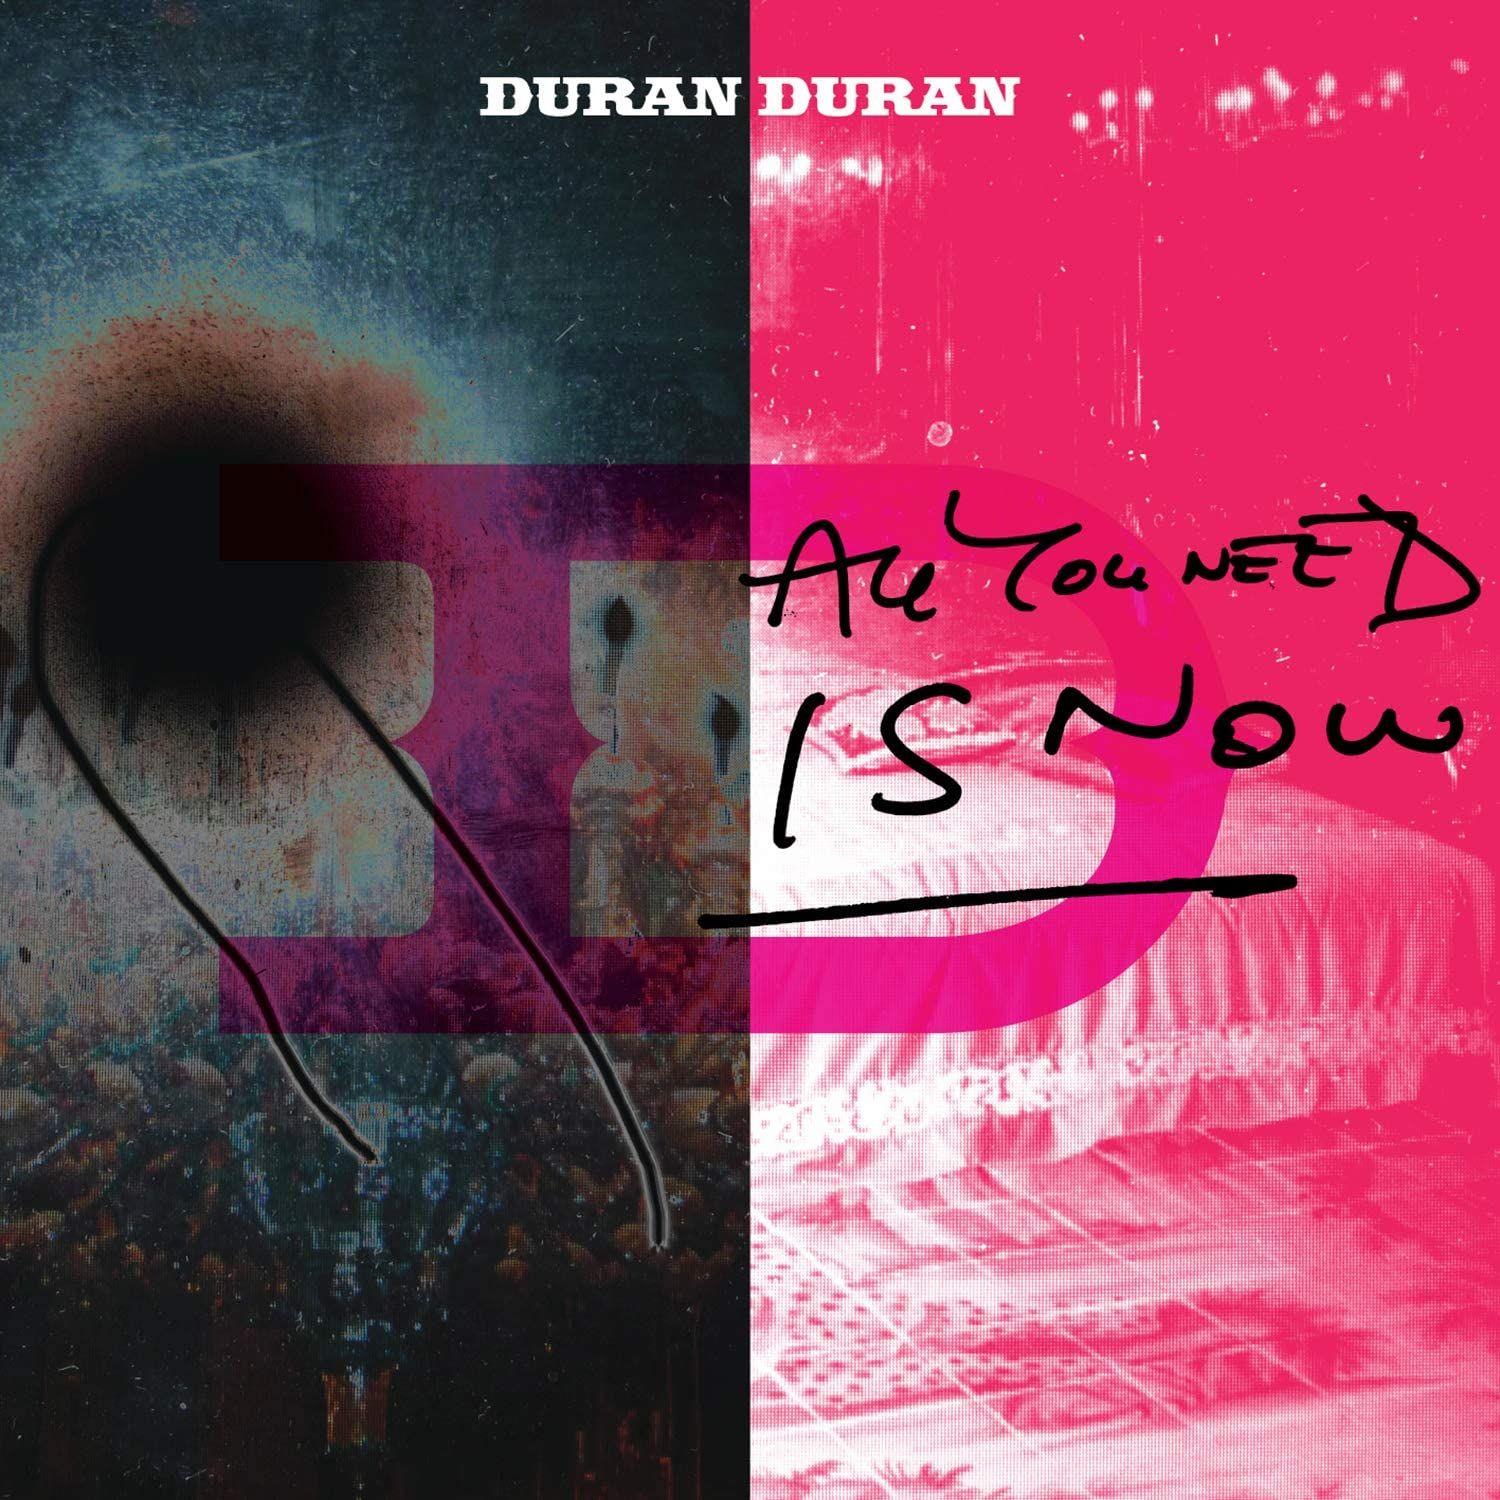 Sprede Hylde Trives Duran Duran - All You Need Is Now 2x Vinyl LP Reissue– Dig In Records